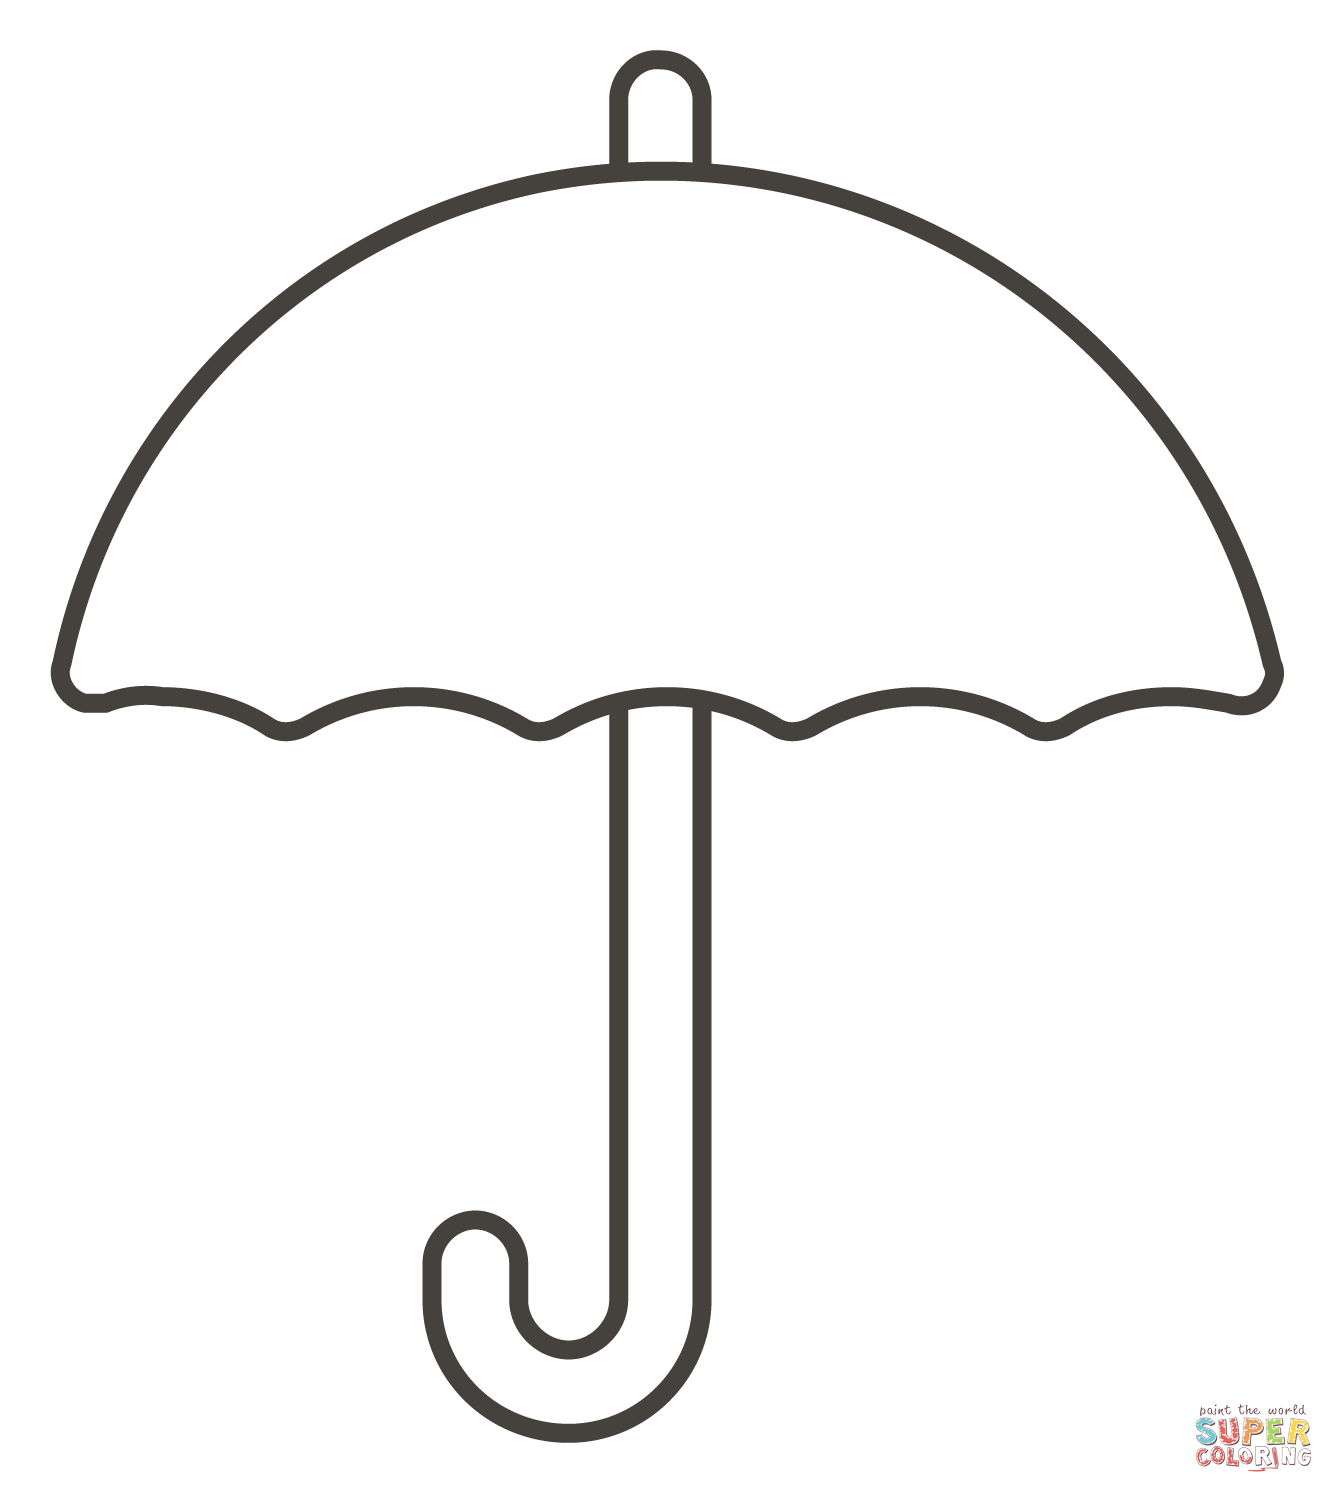 Umbrella coloring page free printable coloring pages